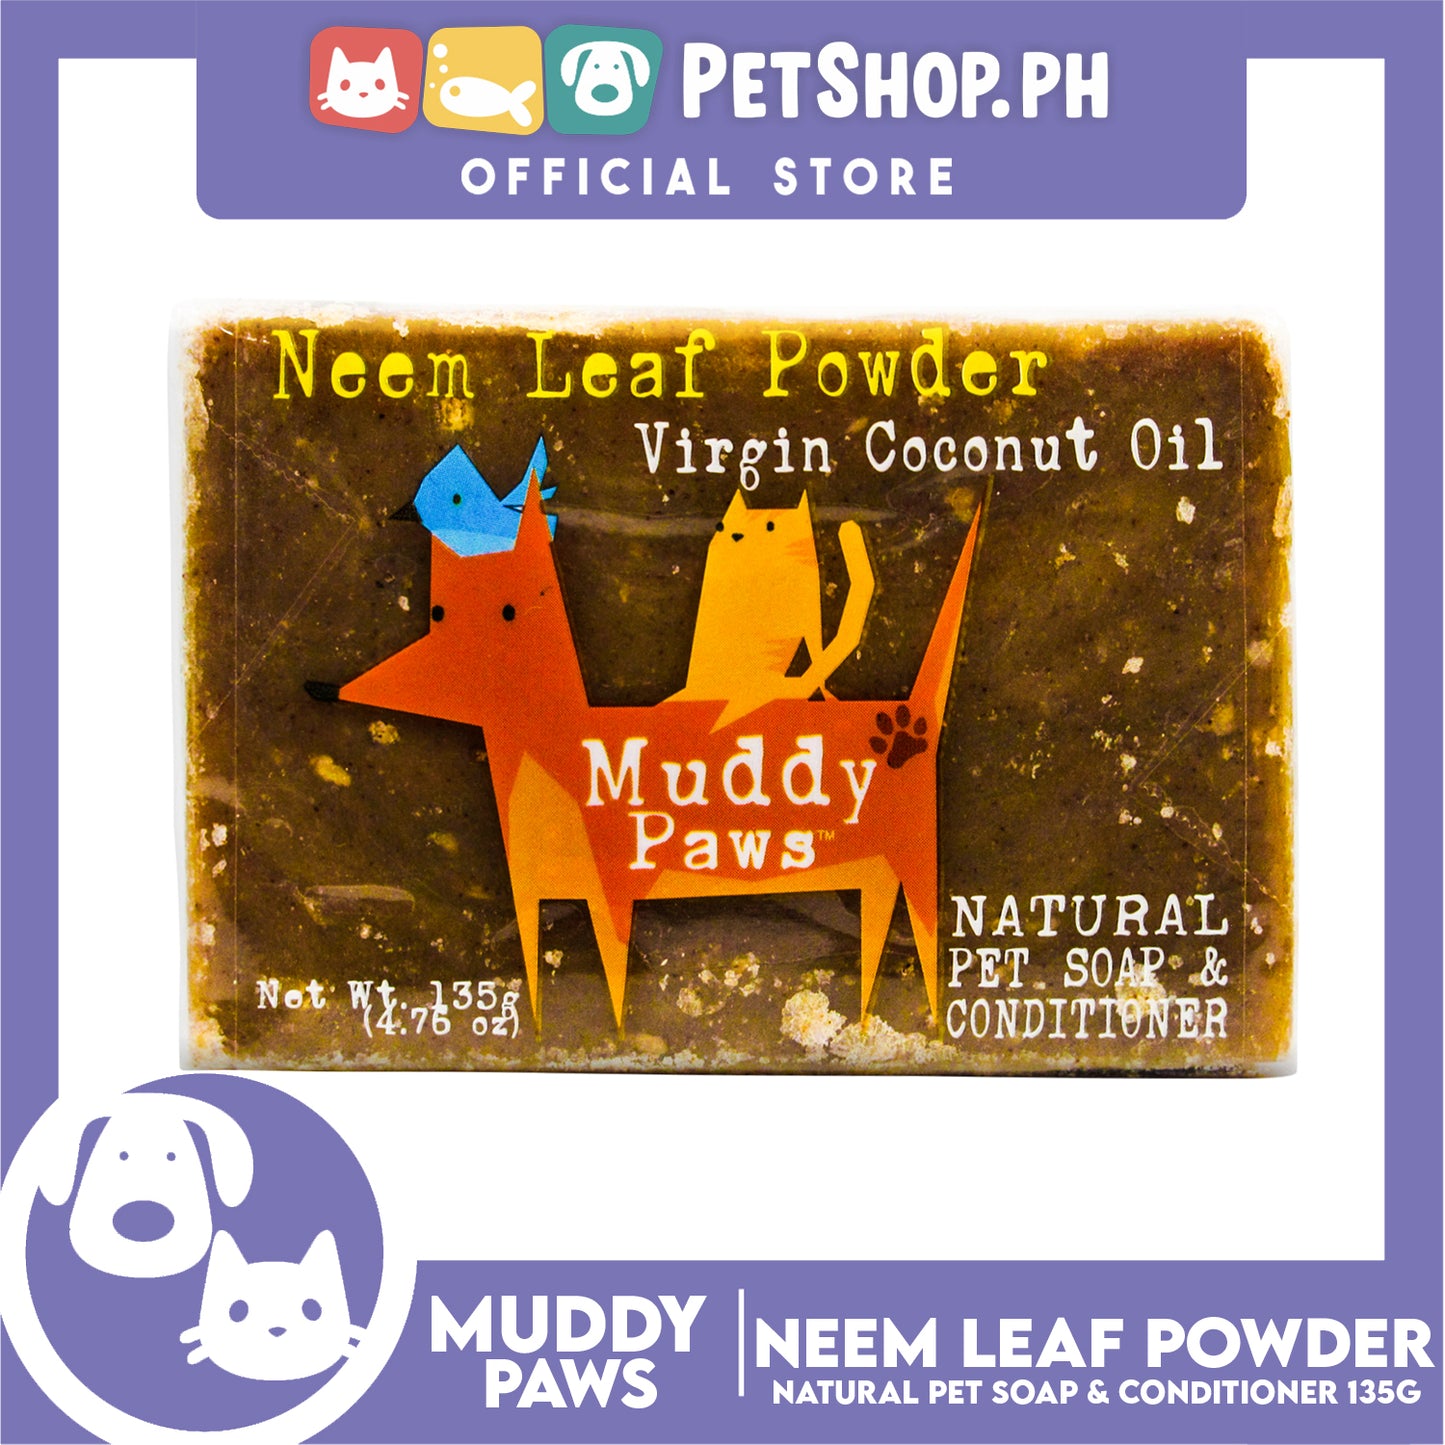 Muddy Paws Neem Leaf Powder VCO 135g Natural Pet Soap and Conditioner